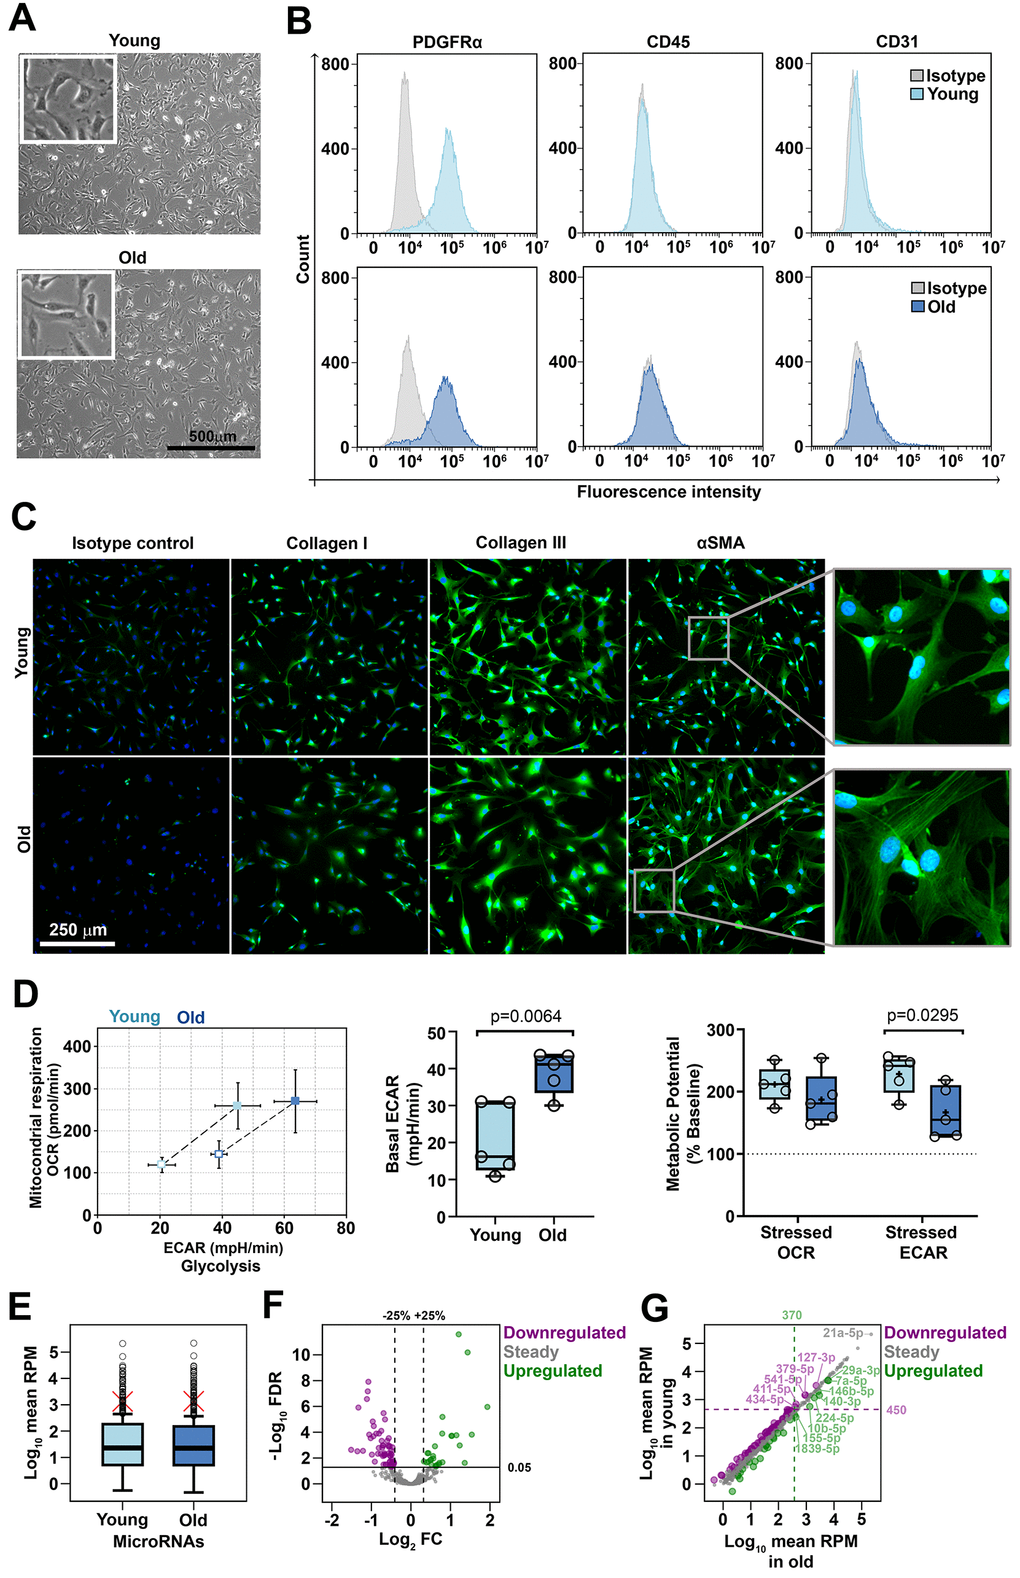 Characterization of cardiac fibroblasts derived from young and old mice (A) Phase-contrast microscopy of cells after 3 days in culture. No morphological differences were identified between young- and old-derived cells. (B) Flow cytometry analysis of young- and old-derived cells after 5 days in culture revealing the presence of PDGFRα and the absence of CD31, CD45. The histograms illustrate representative results of three experiments. (C) Fluorescent microscopy images illustrating the presence of αSMA, collagen I and collagen III. Note the different patterns of SMA in the two groups (inset). The pictures are representative from three experiments. (D) Cell energy phenotypes of young- and old-derived cardiac fibroblasts obtained by using XF Cell Energy Phenotype Report Generator. (E) Distribution of mean expression levels of miRNAs in young and old cardiac fibroblasts. Red crosses mark mean values. Circles mark outliers. (F) Volcano plot showing 530 sequenced miRNAs as steady or differentially expressed (downregulated or upregulated). MiRNAs with FDR G) The expression levels of miRNAs in young versus old cardiac fibroblasts. Upregulated miRNAs with a mean RPM value in old cardiac fibroblasts over 370 and downregulated miRNAs with a mean RPM value in young cardiac fibroblasts over 450 were depicted as outliers. FDR, false discovery rate (p-value adjusted for multiple testing by the Benjamini-Hochberg procedure); FC, fold change (miRNA in old compared to young cardiac fibroblasts); RPM, reads per million.